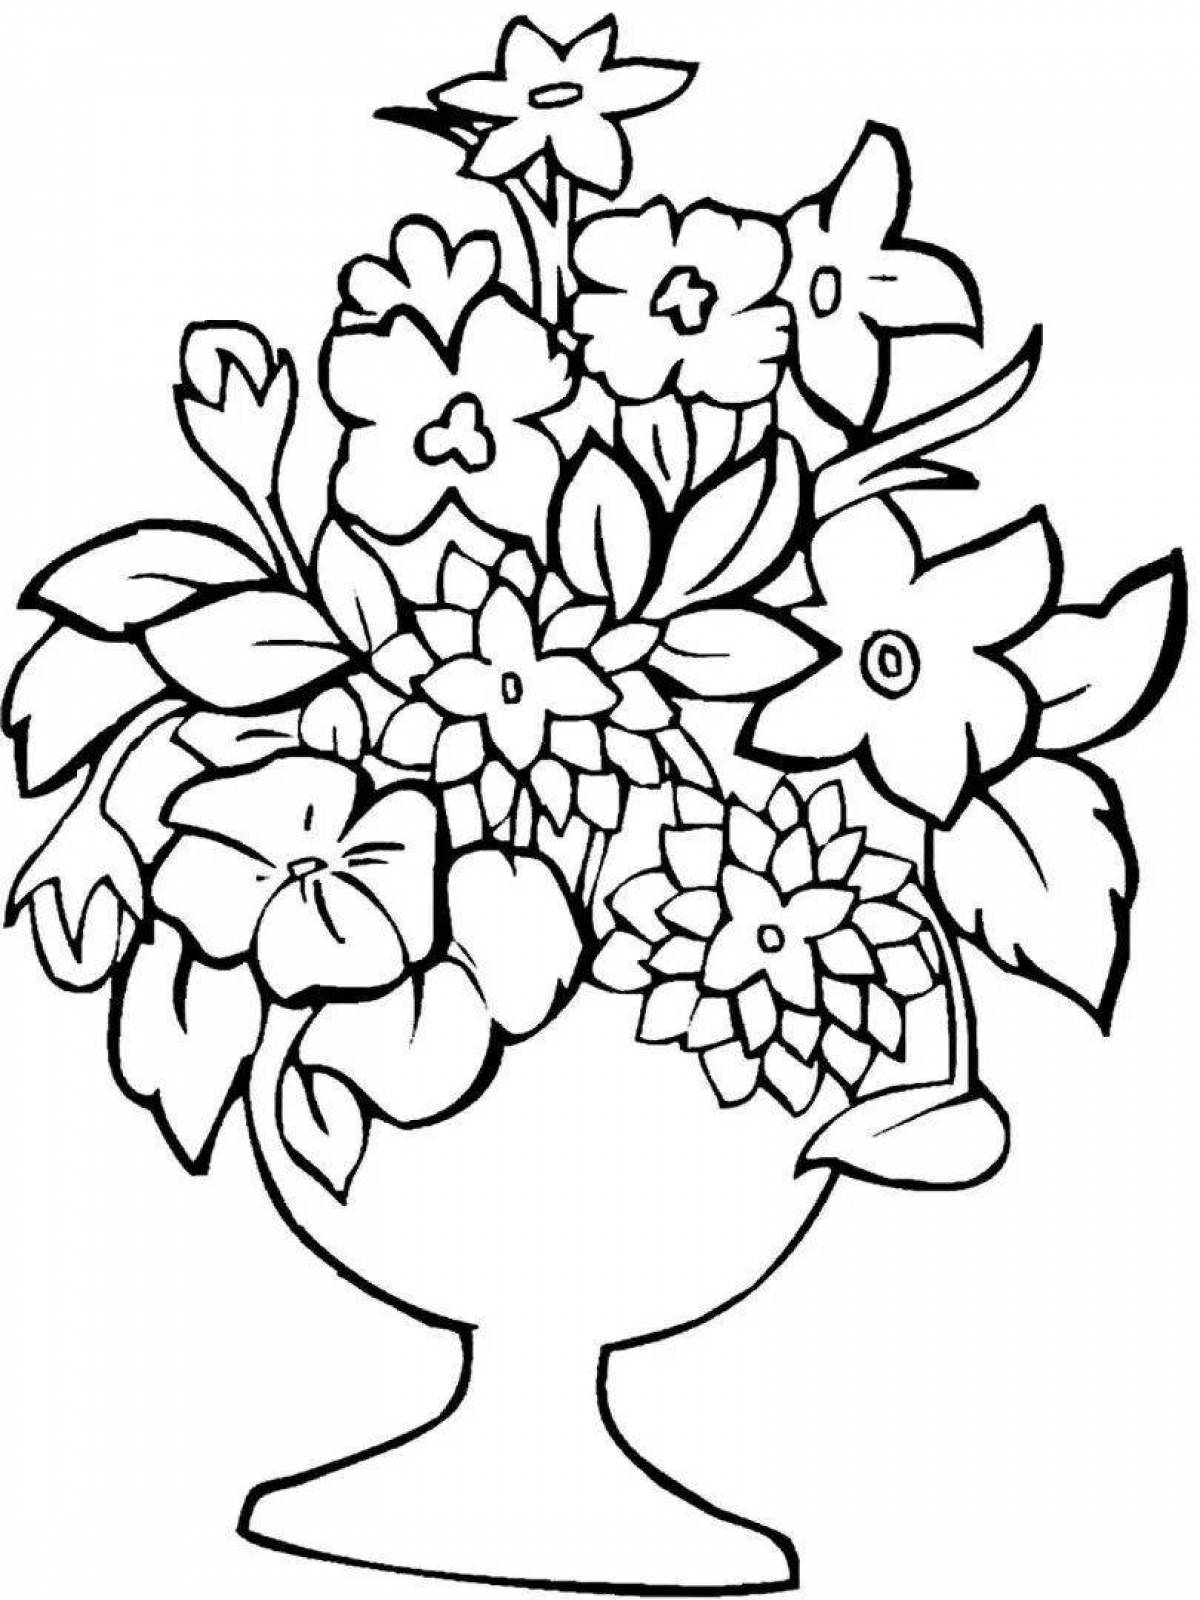 Glitter vase with flowers coloring book for children